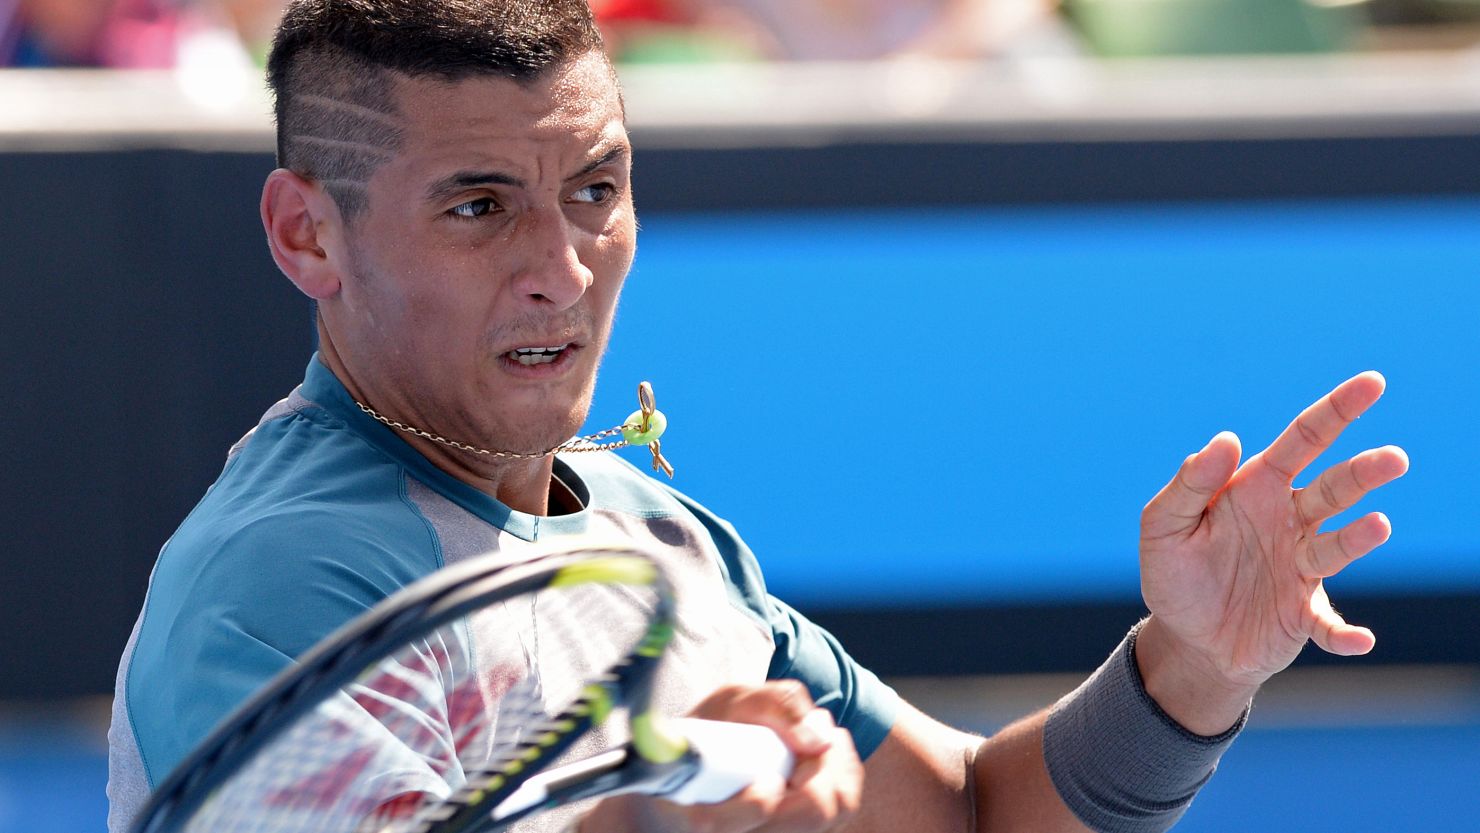 Australian teenager Nick Kyrgios has rocketed up the rankings after his Wimbledon heroics.